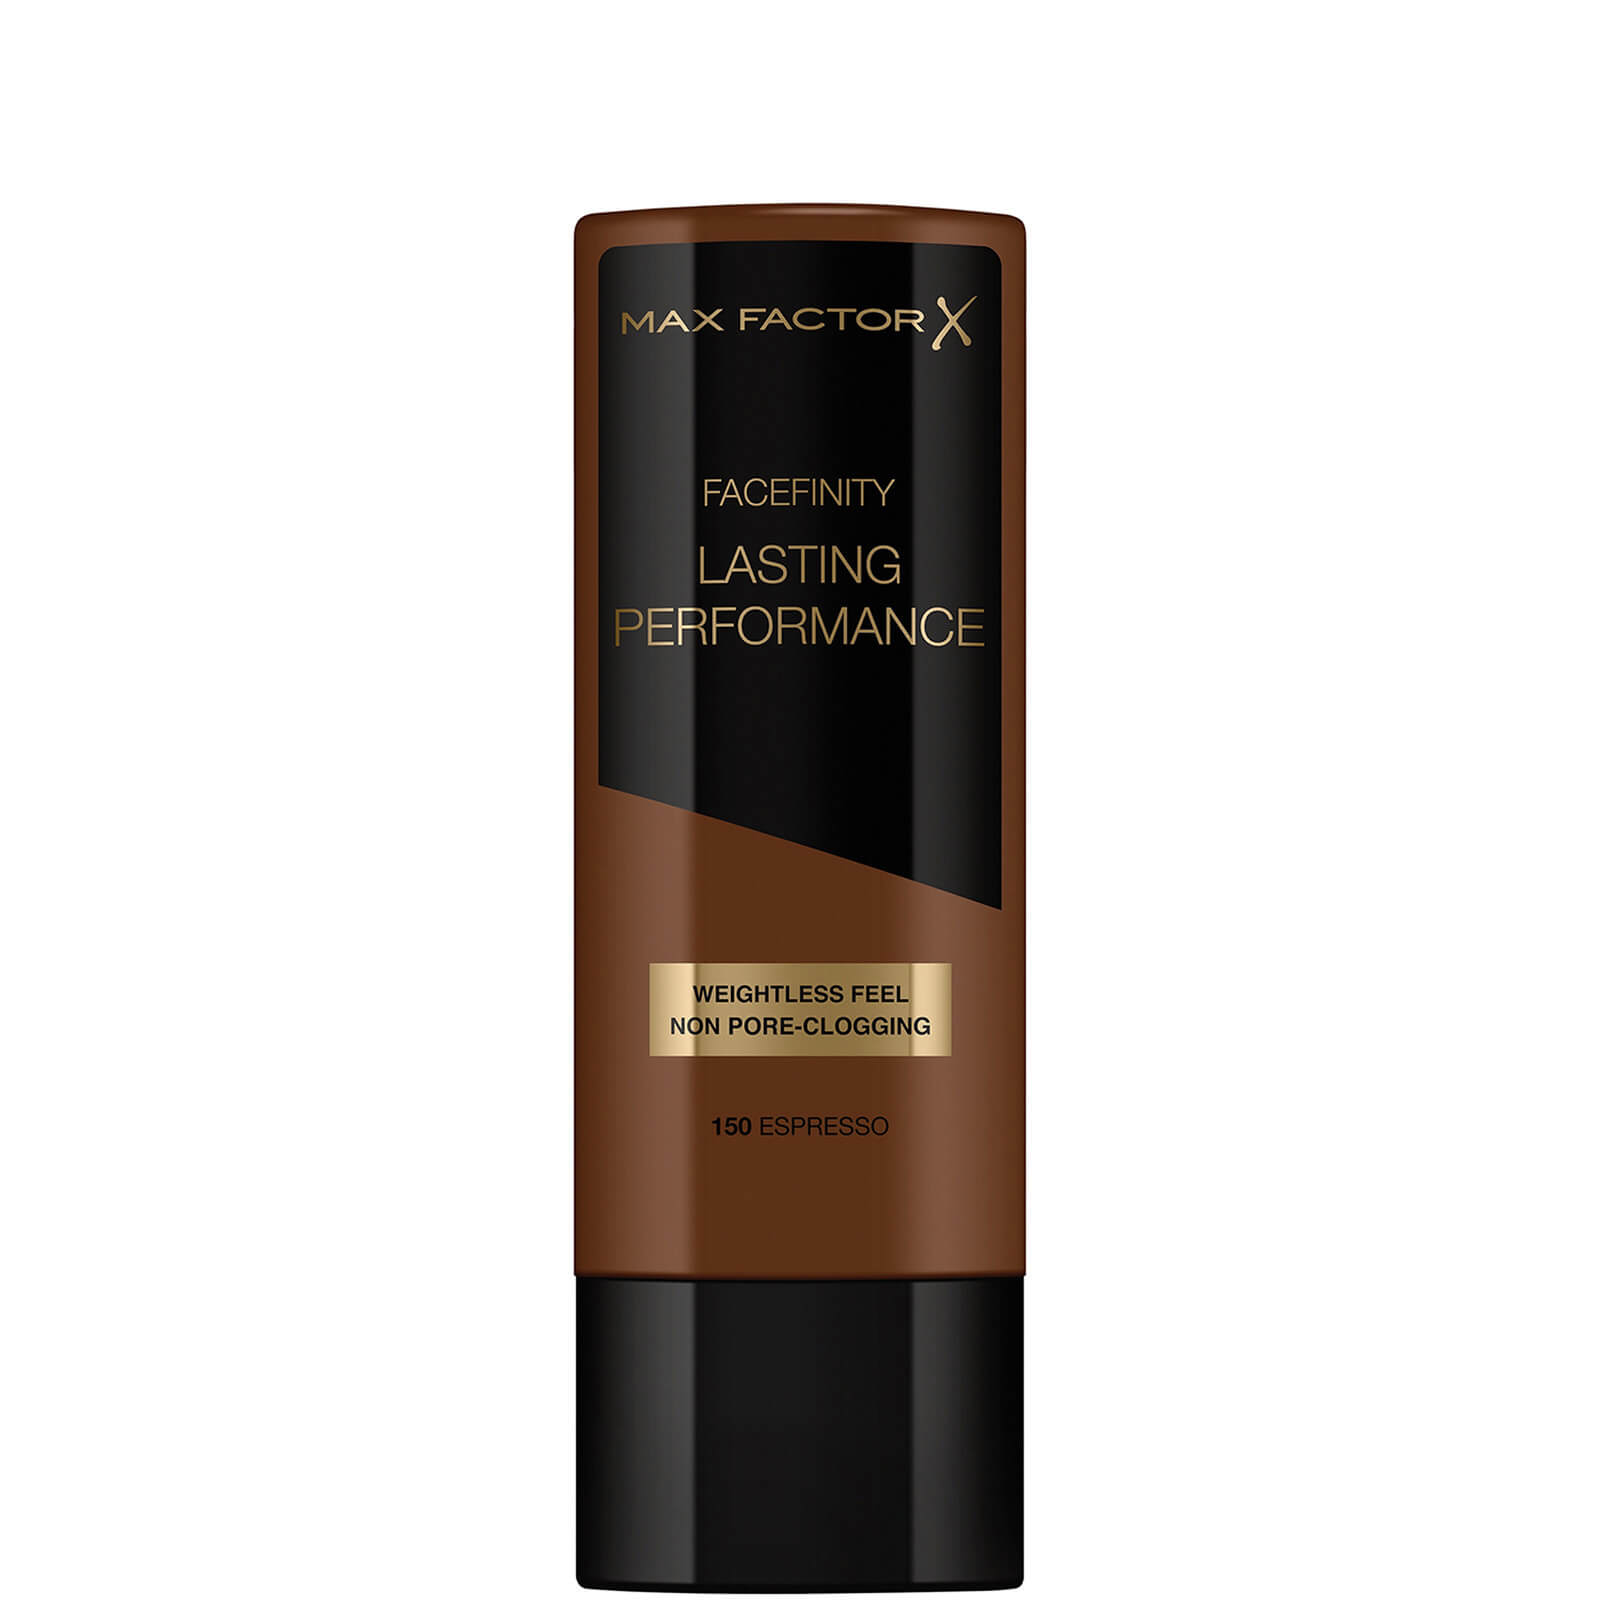 Max Factor Lasting Performance Restage 35g (Various Shades) - 150 Espresso